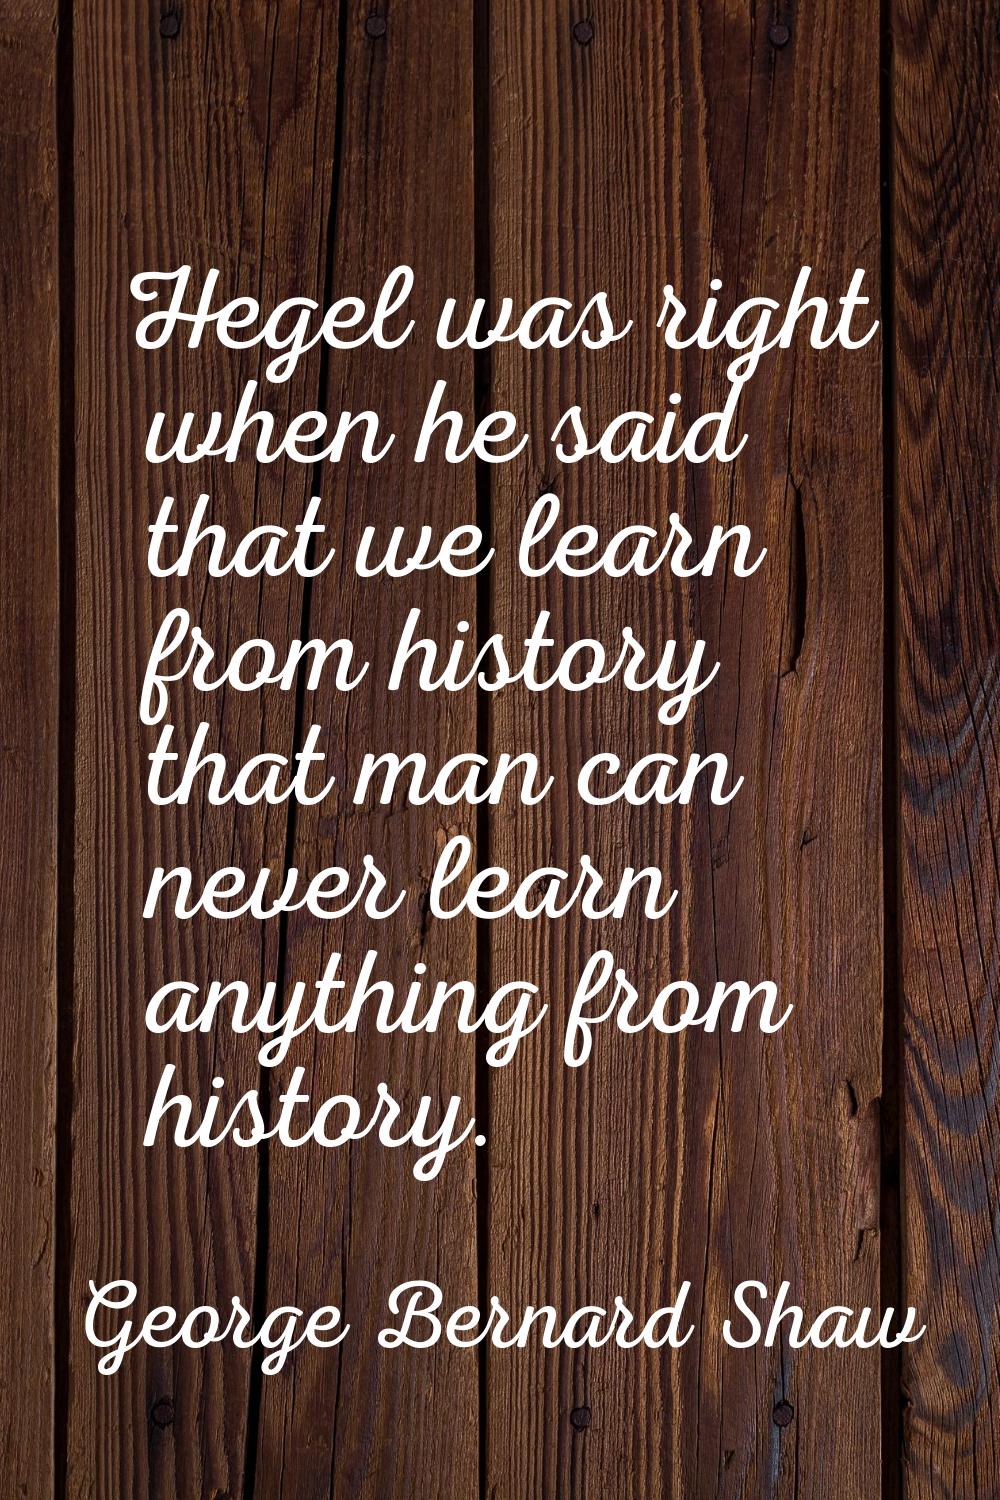 Hegel was right when he said that we learn from history that man can never learn anything from hist